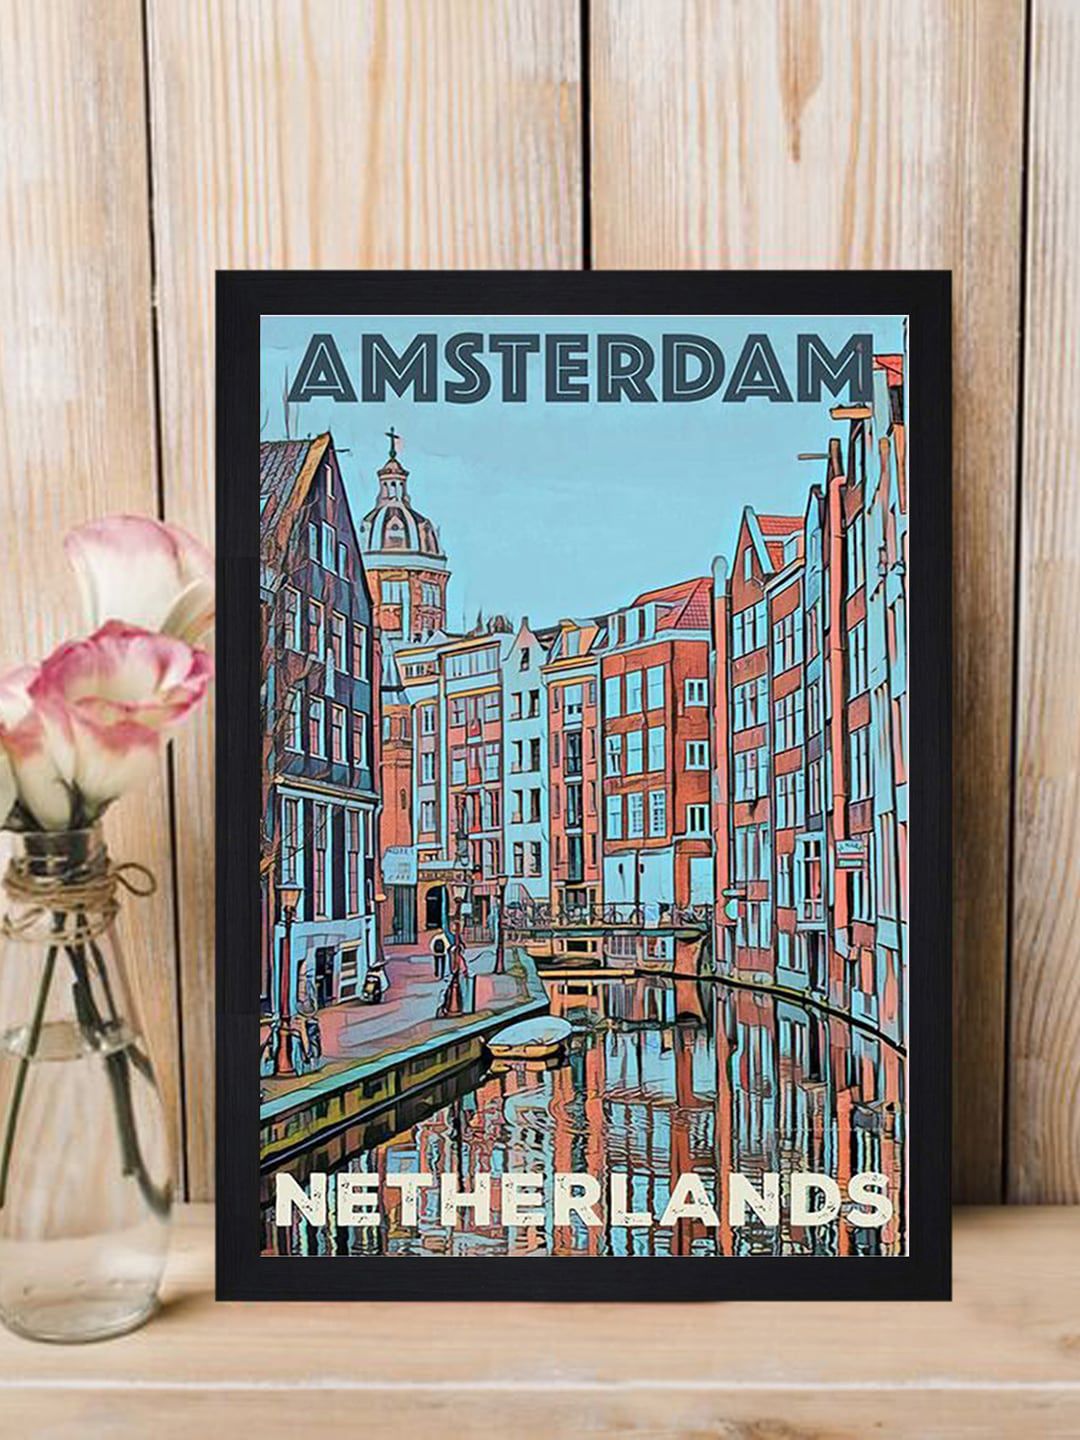 Gallery99 Multicolored Amsterdam Nether Lands Framed Wall Art Price in India